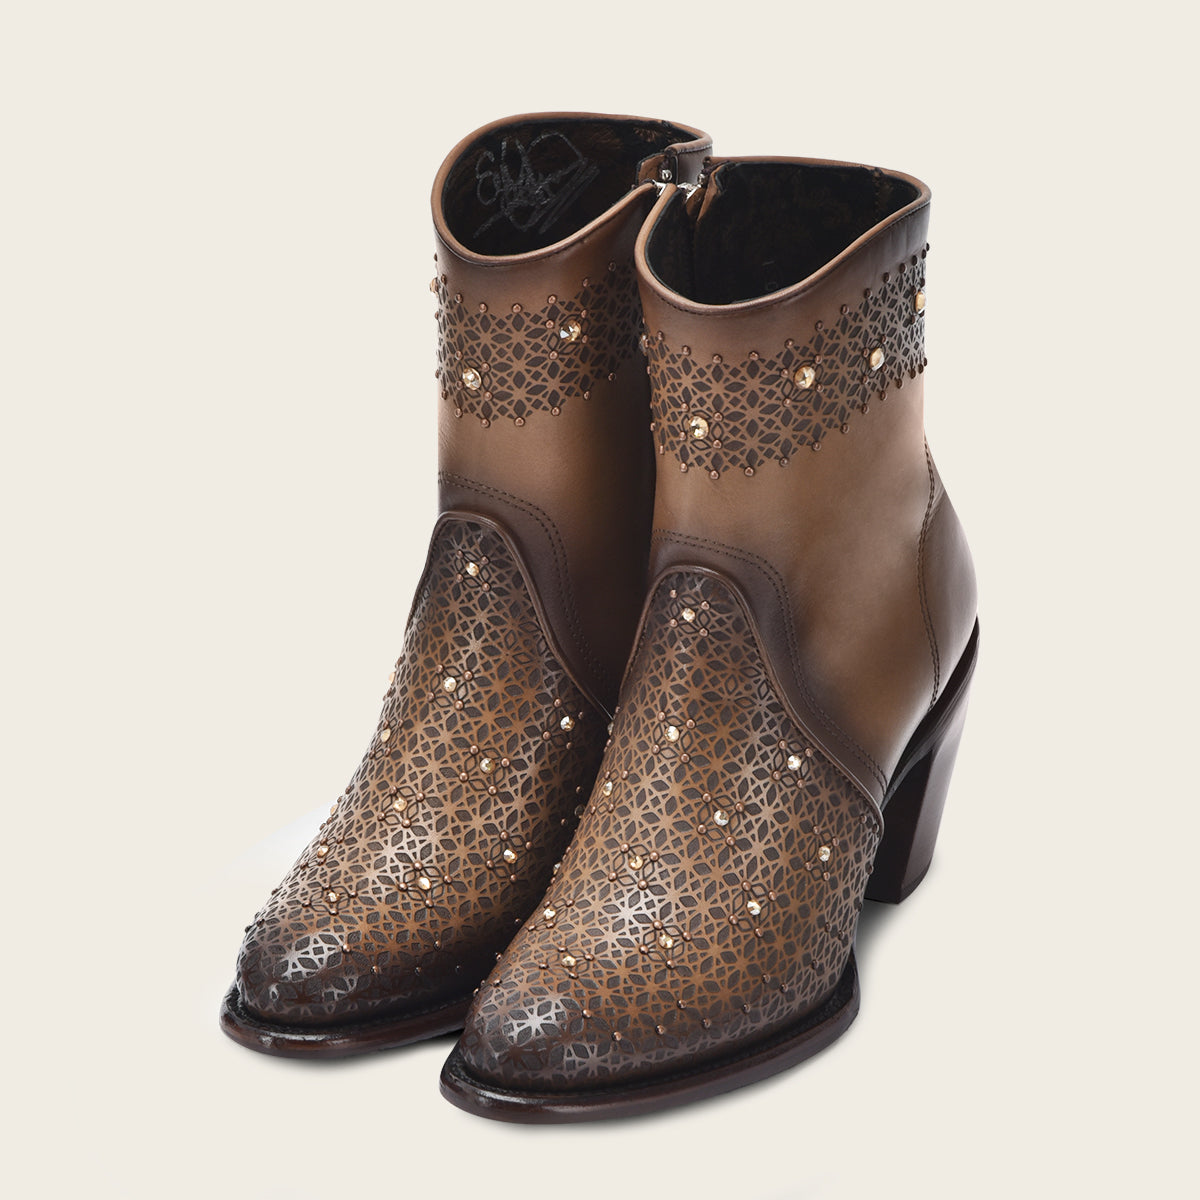 Perforated honey brown leather ankle bootie with Austrian crystals